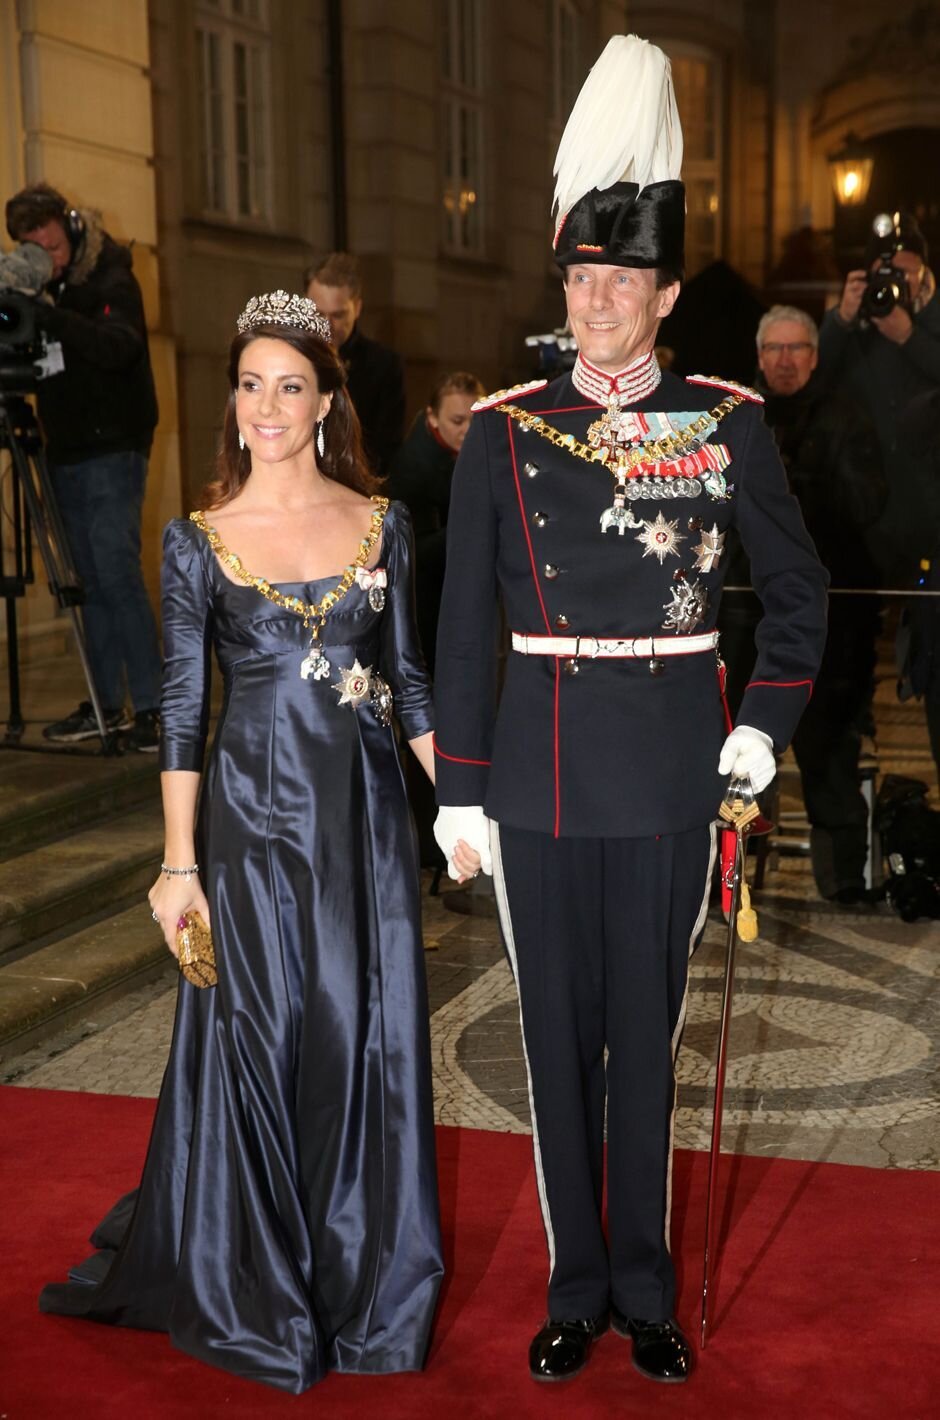 Prince Joachim and Princess Attend Reception 2020 — Royal Portraits Gallery